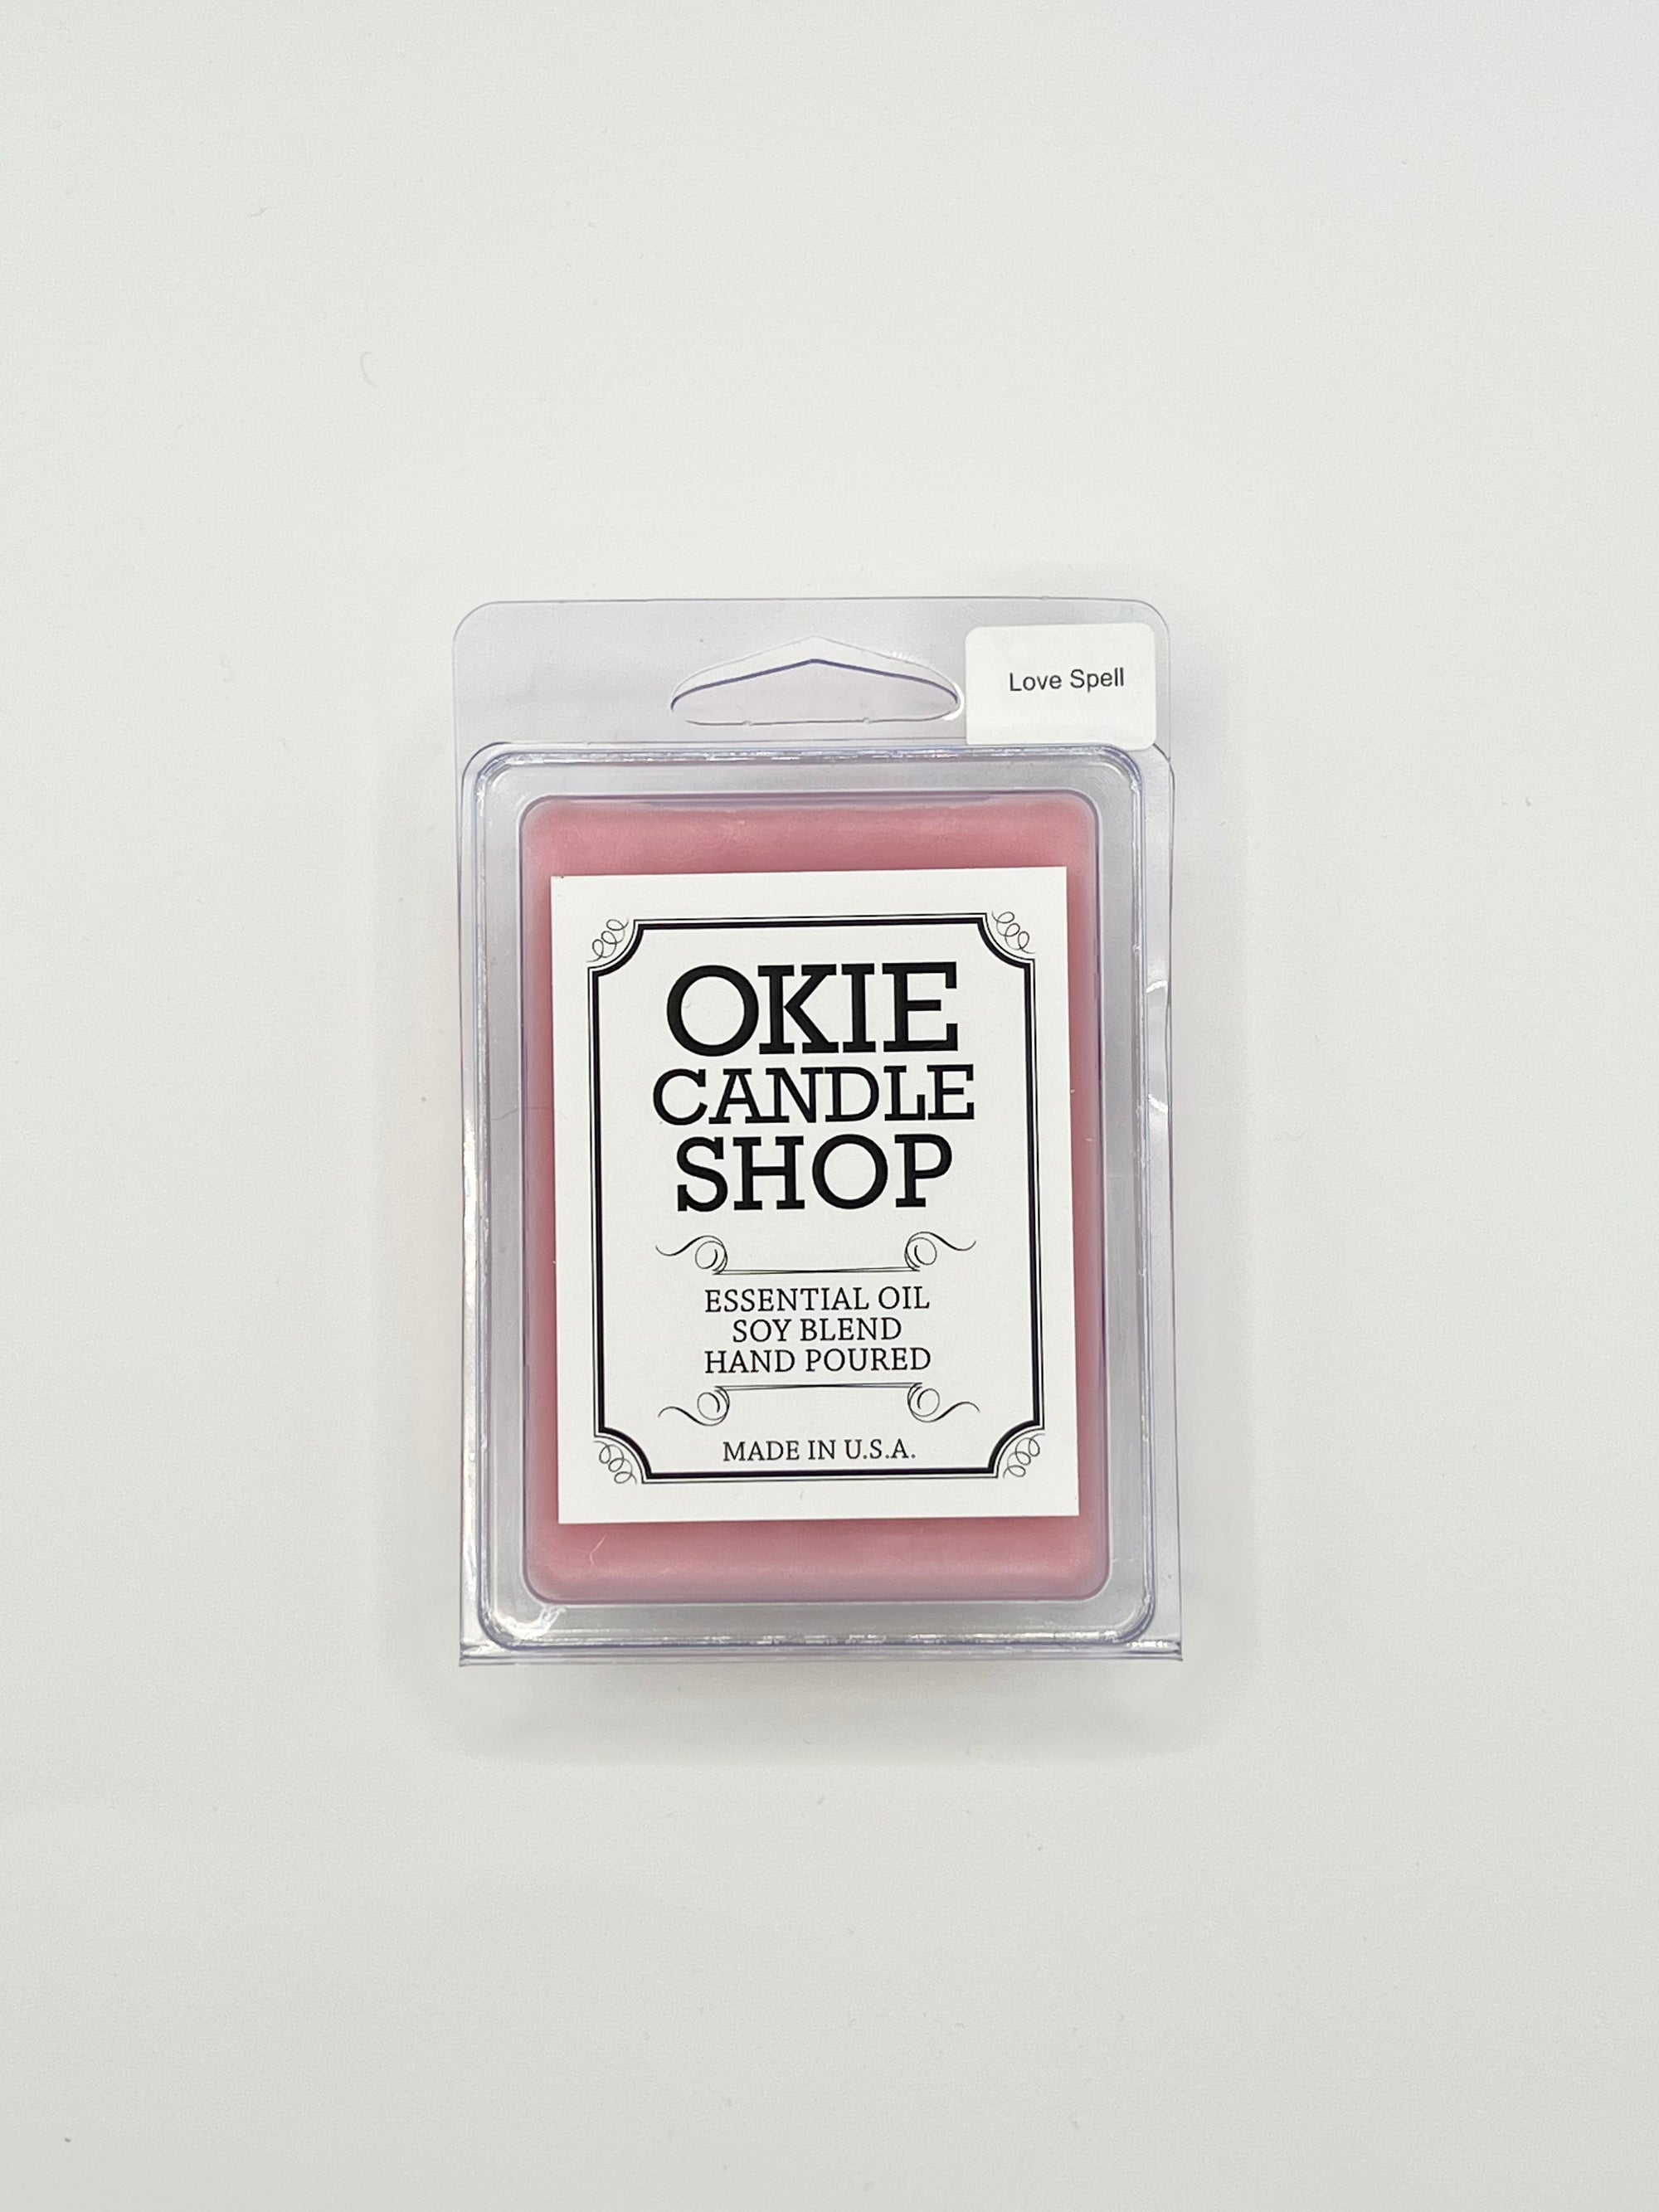 Okie Candle Love Spell - Wax Melts